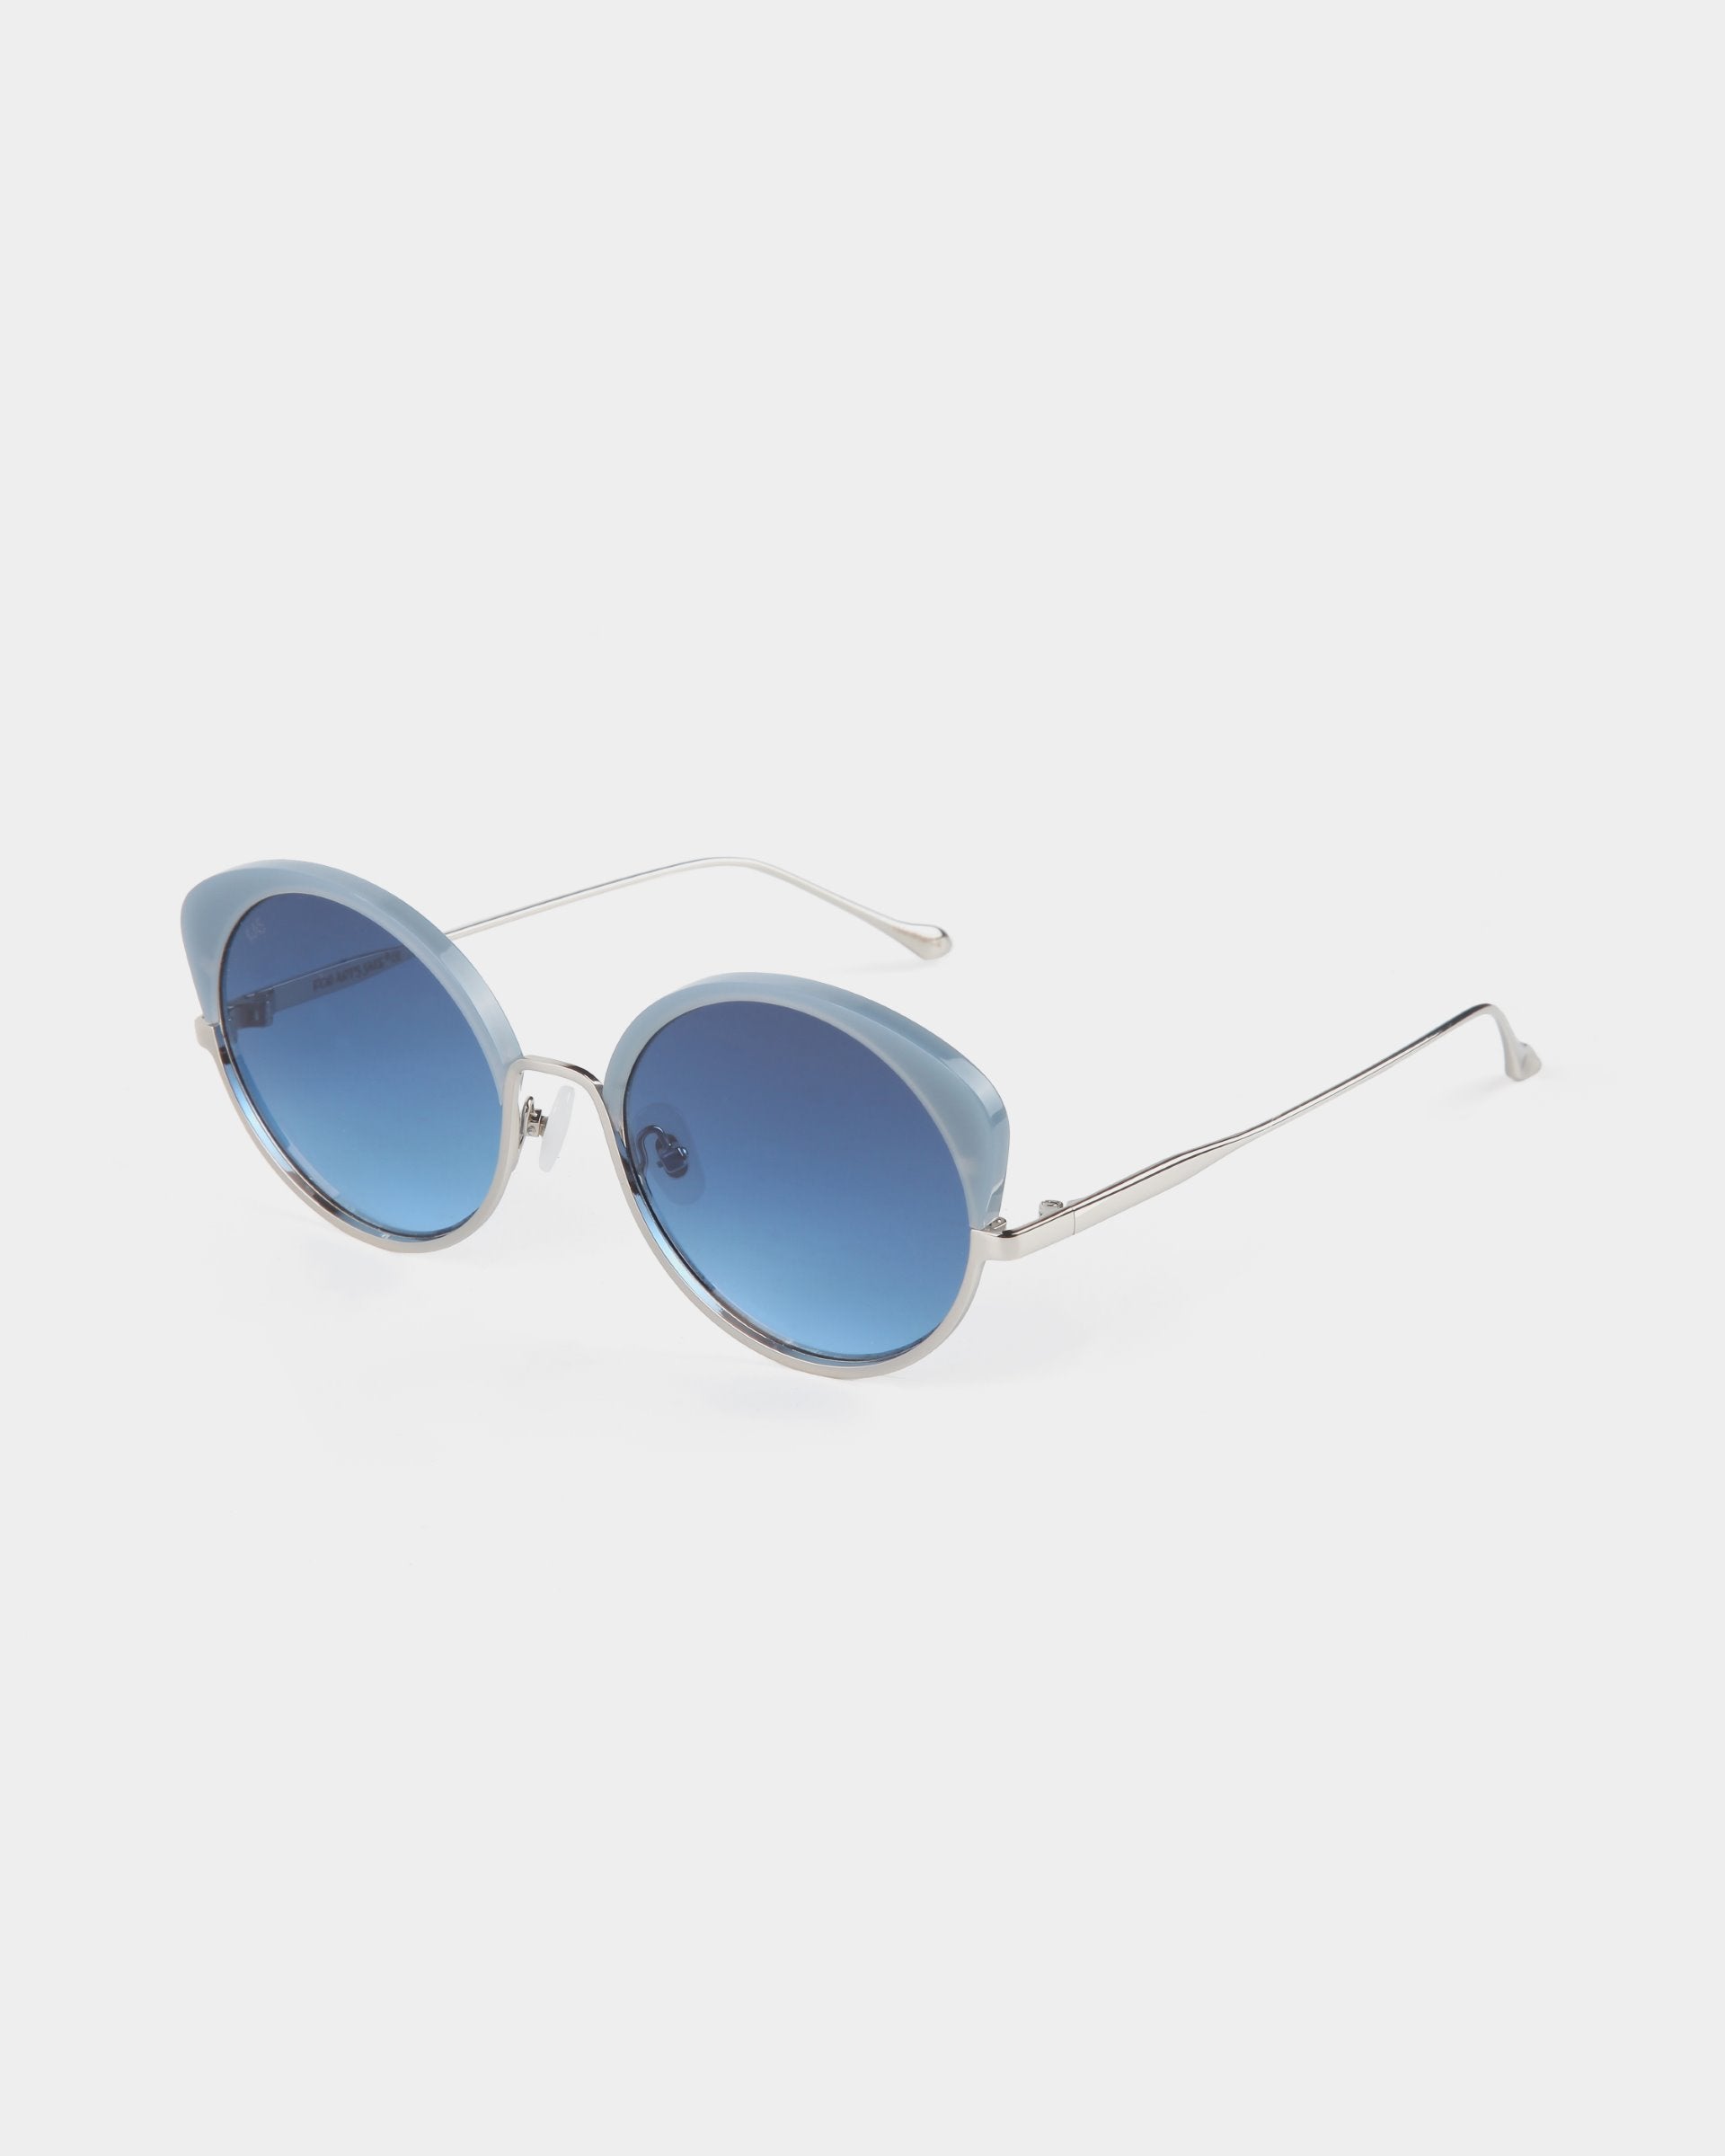 A pair of stylish Cocoon by For Art&#39;s Sake® cat-eye sunglasses with light blue, oval-shaped lenses and sleek silver frames. The arms are thin and slightly curved, featuring a minimal design. These handcrafted eyewear pieces offer UV protection and are positioned at an angle against a plain white background.